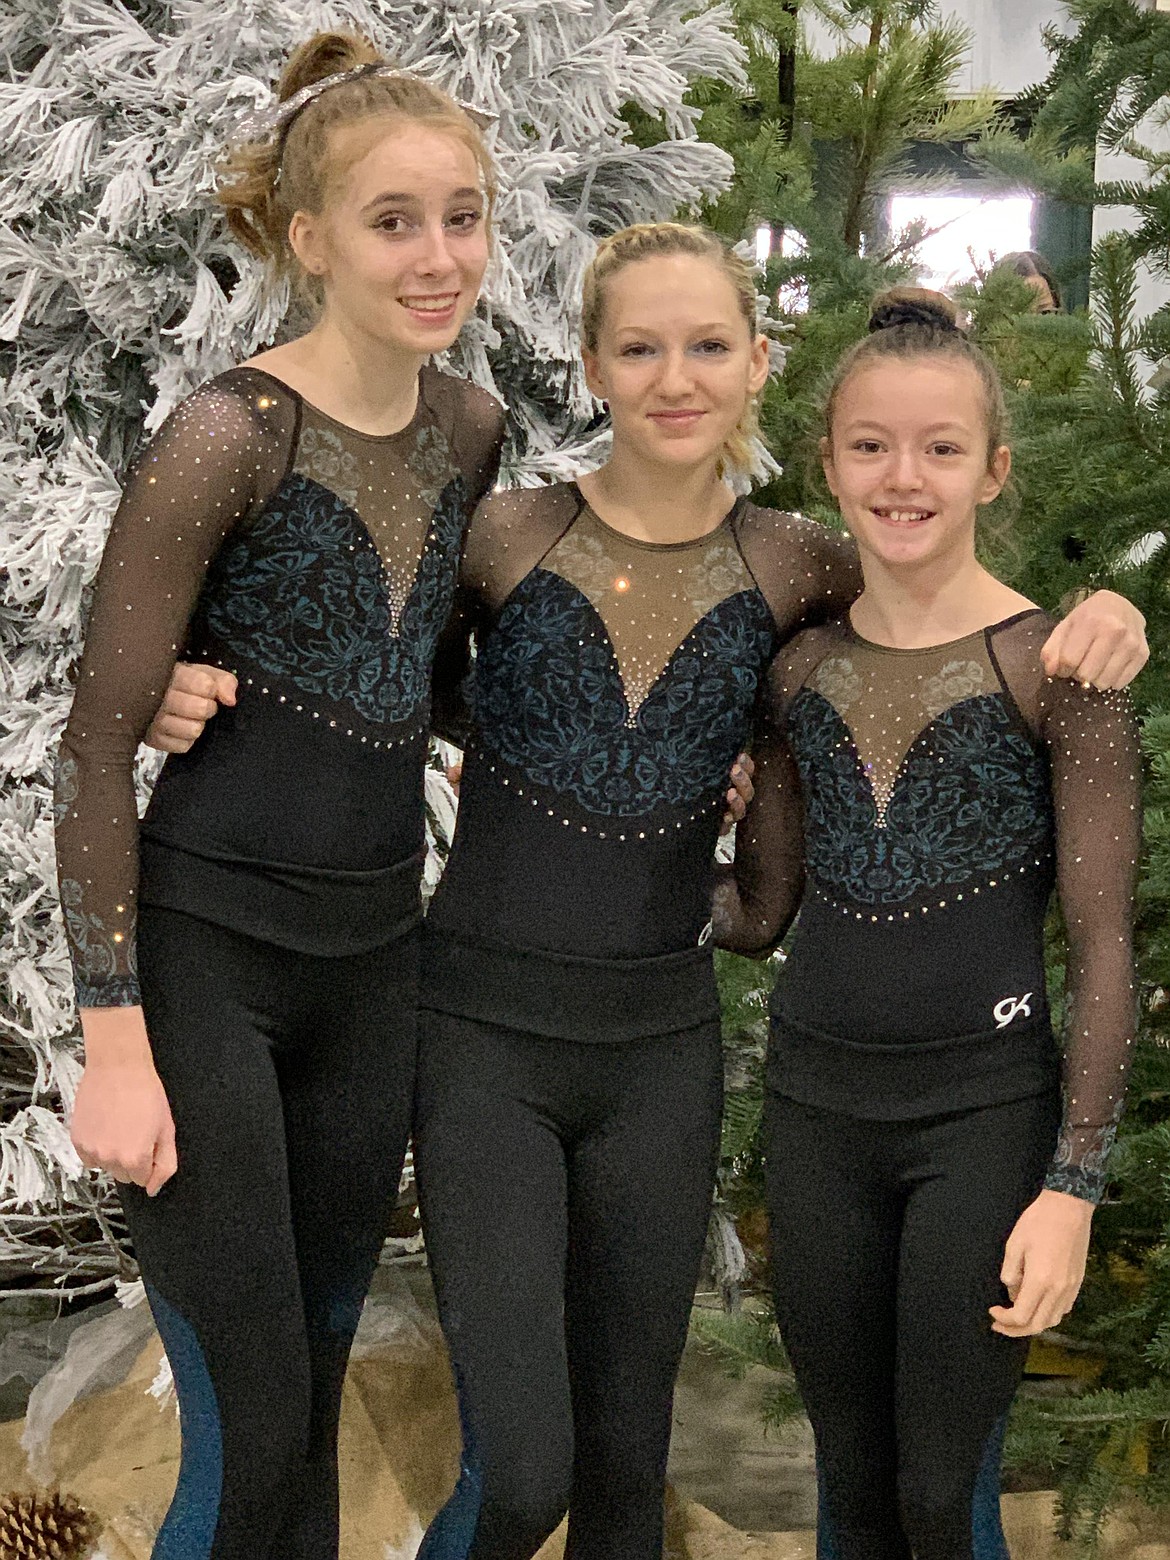 Courtesy photo
Technique Gymnastics Level 8s at The Glacier Challenge last weekend in Kalispell, Mont. From left are Naomi Fritts, Cadence Wurster and Madeleine Hoare.